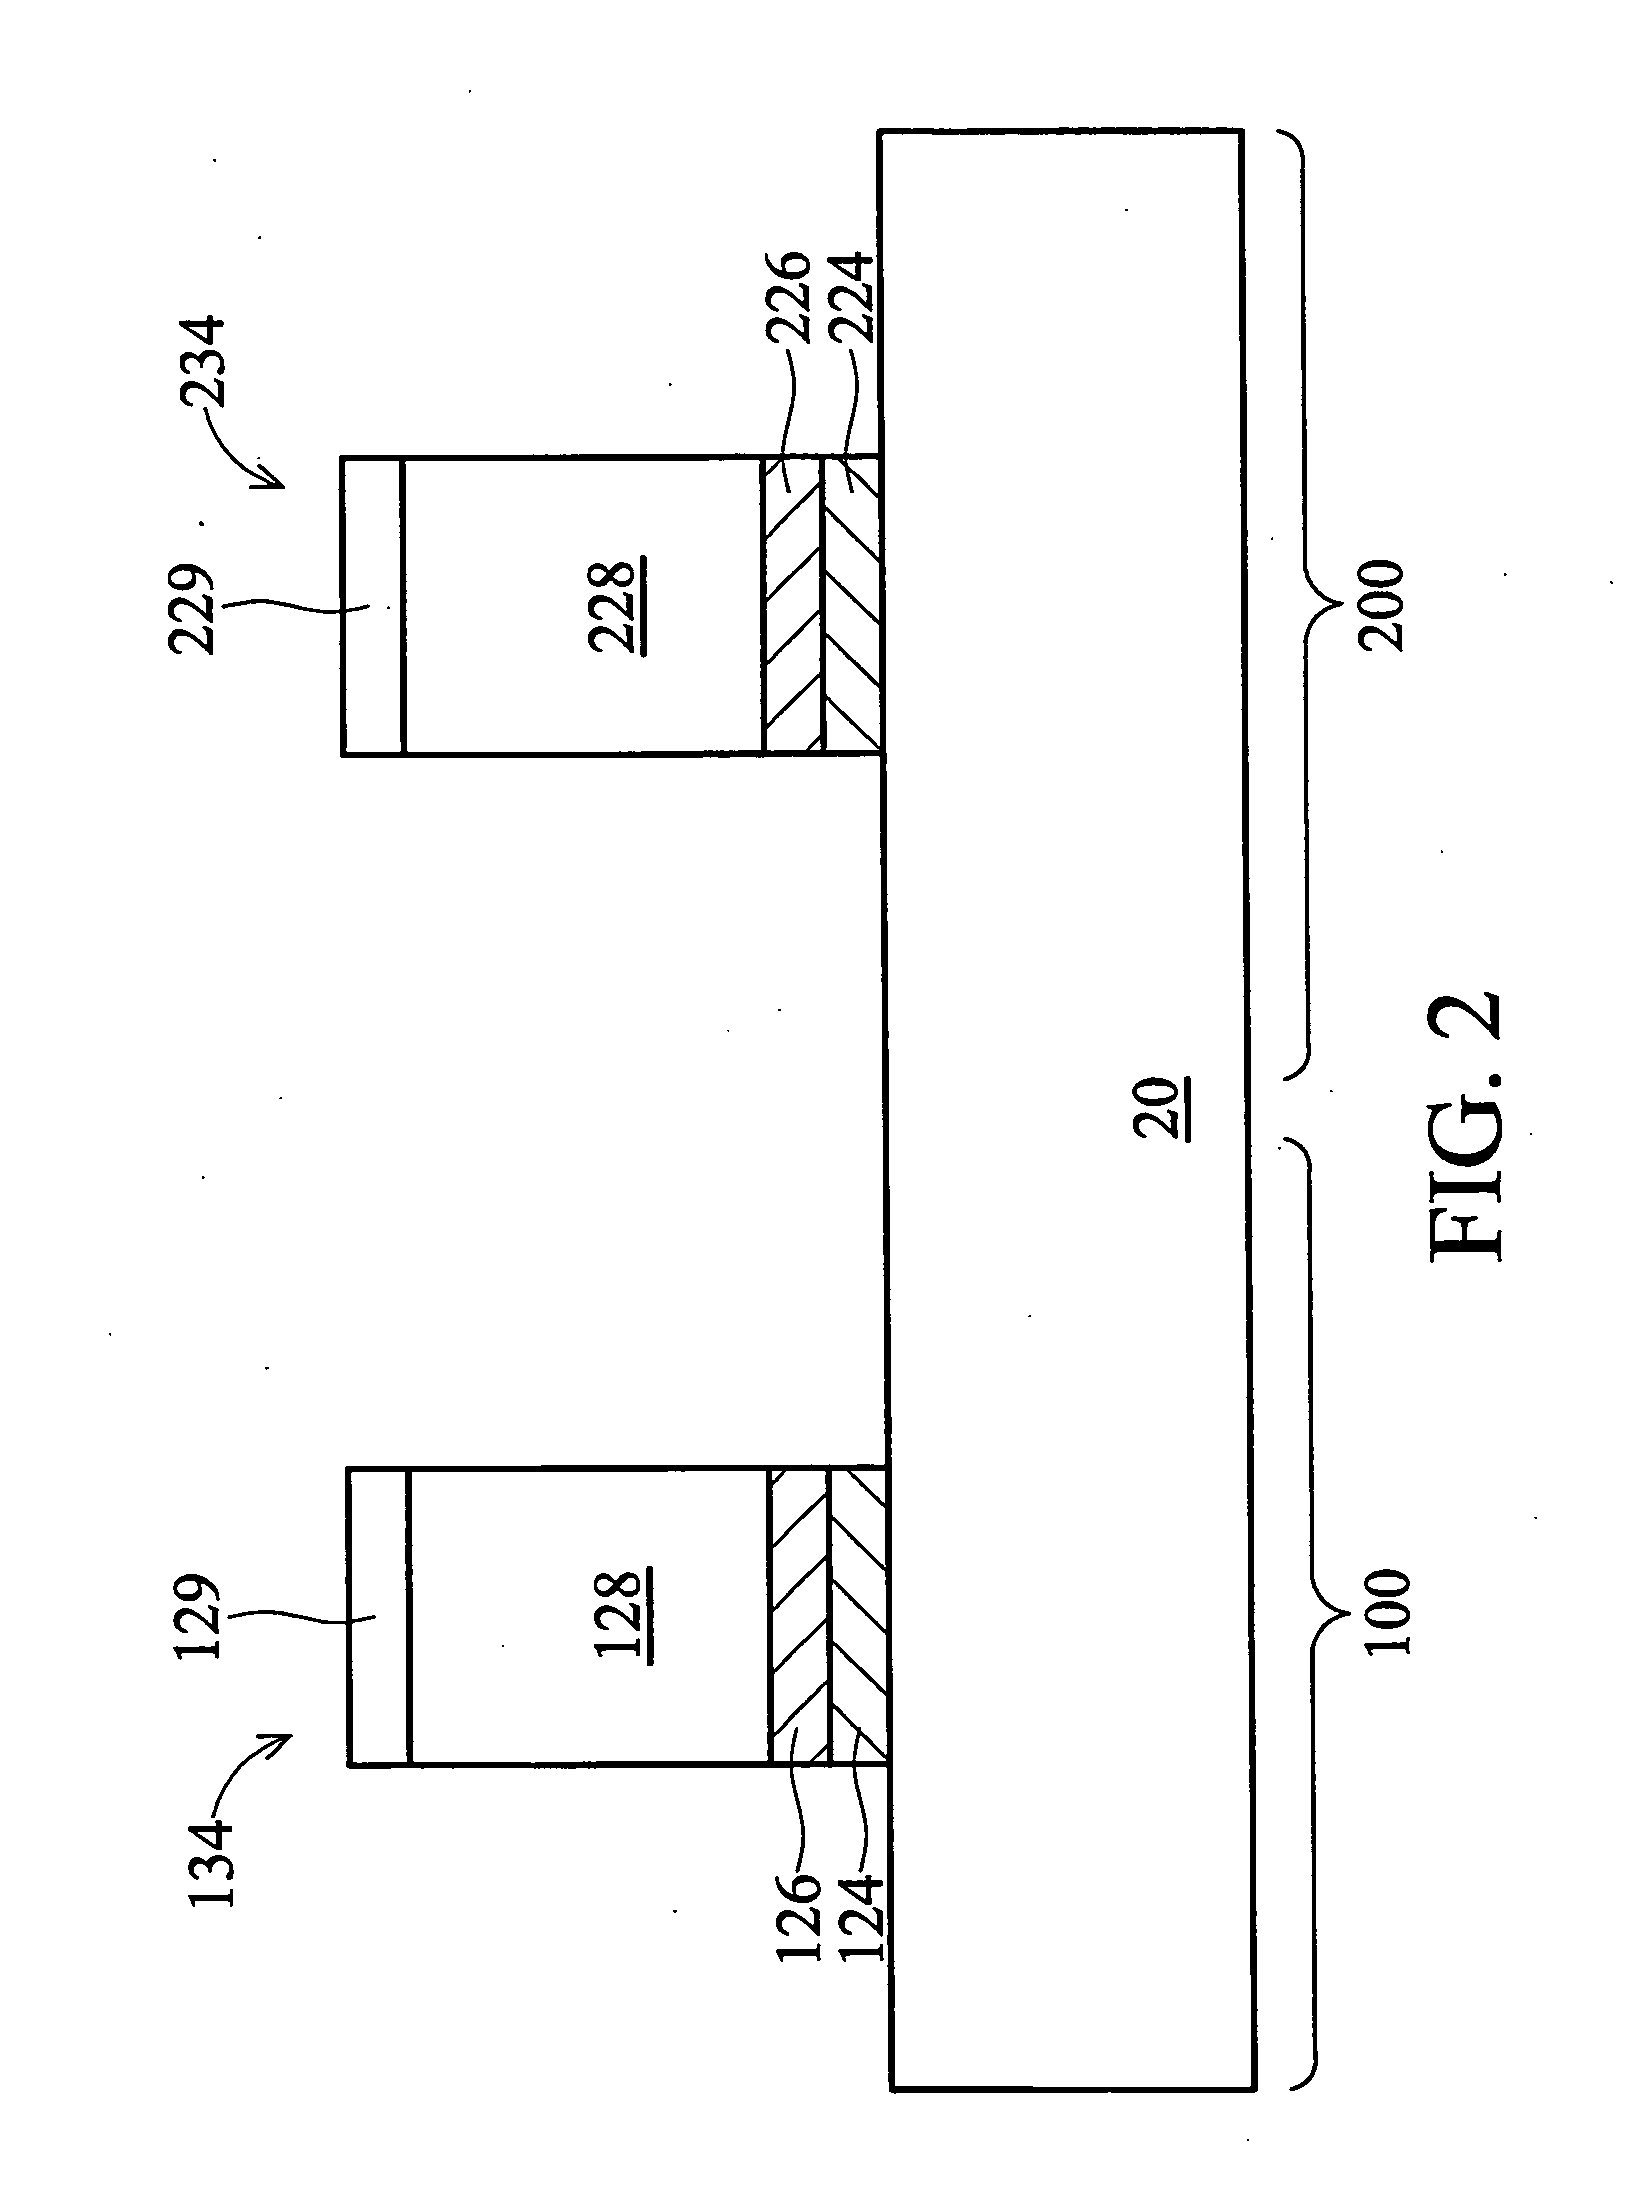 Hybrid process for forming metal gates